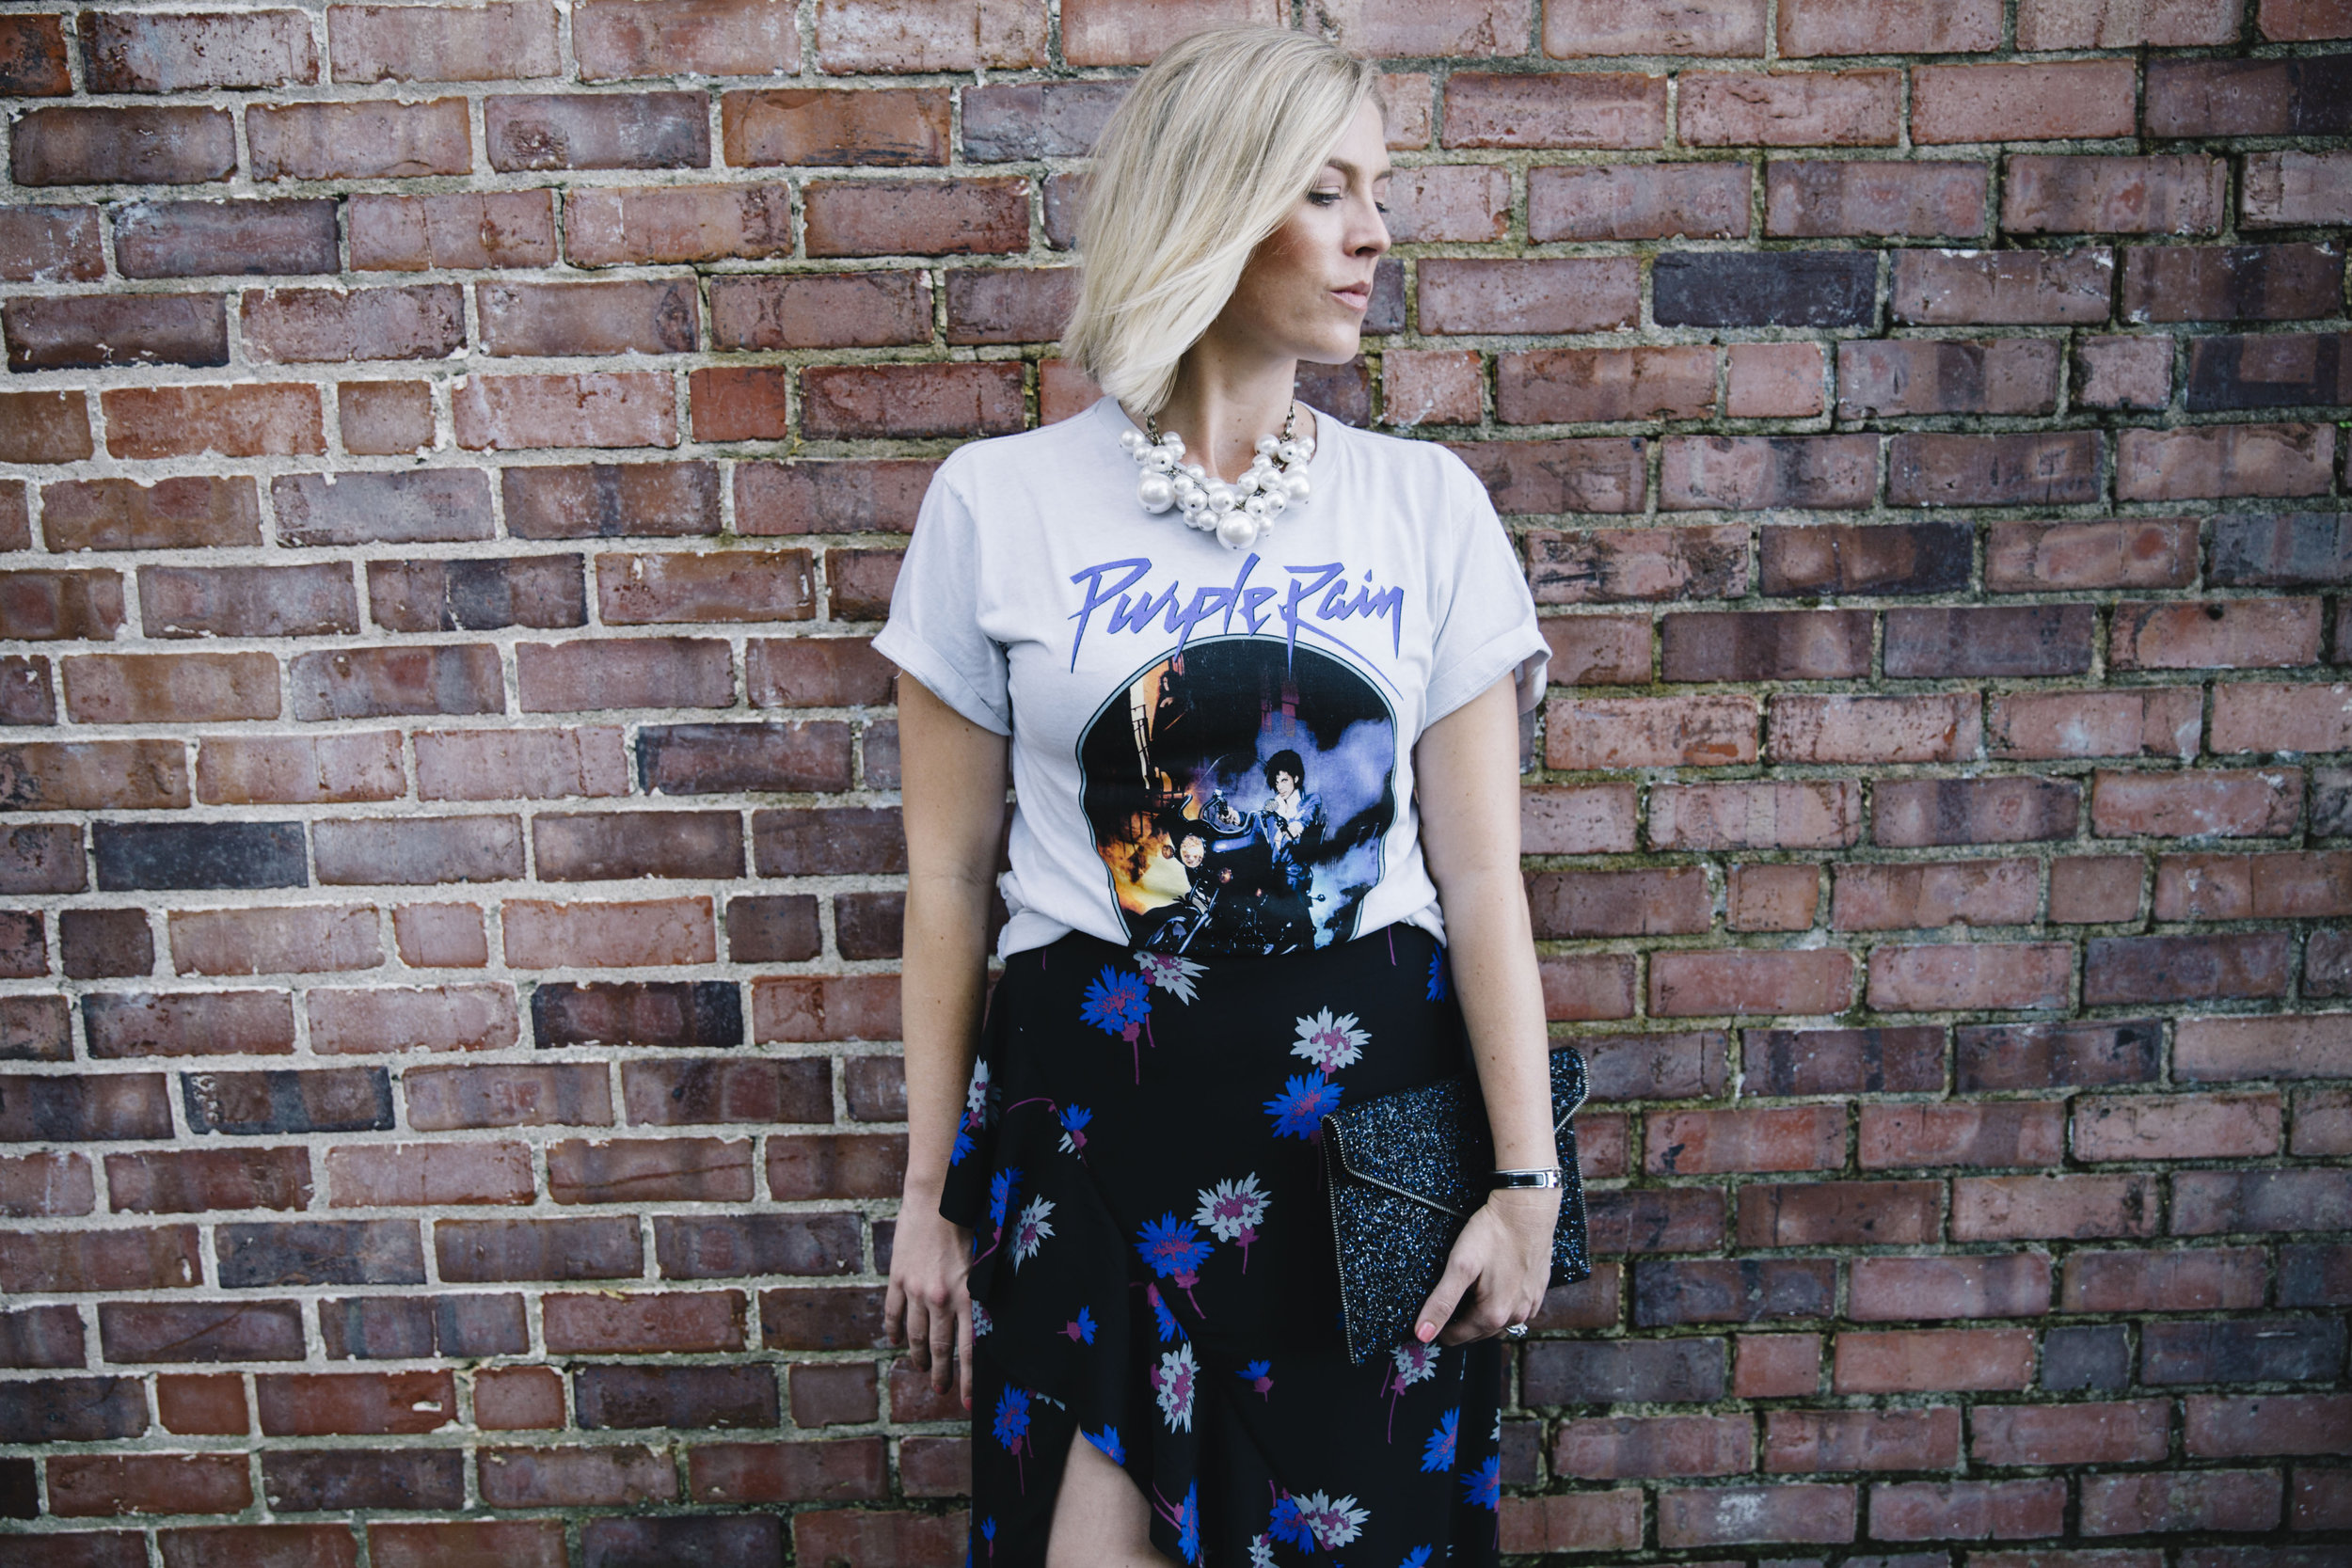 Graphic Tee and Floral Midi Skirt by fashion blogger Stephanie Mack of The Borrowed Babes fashion blog in Jacksonville, FL